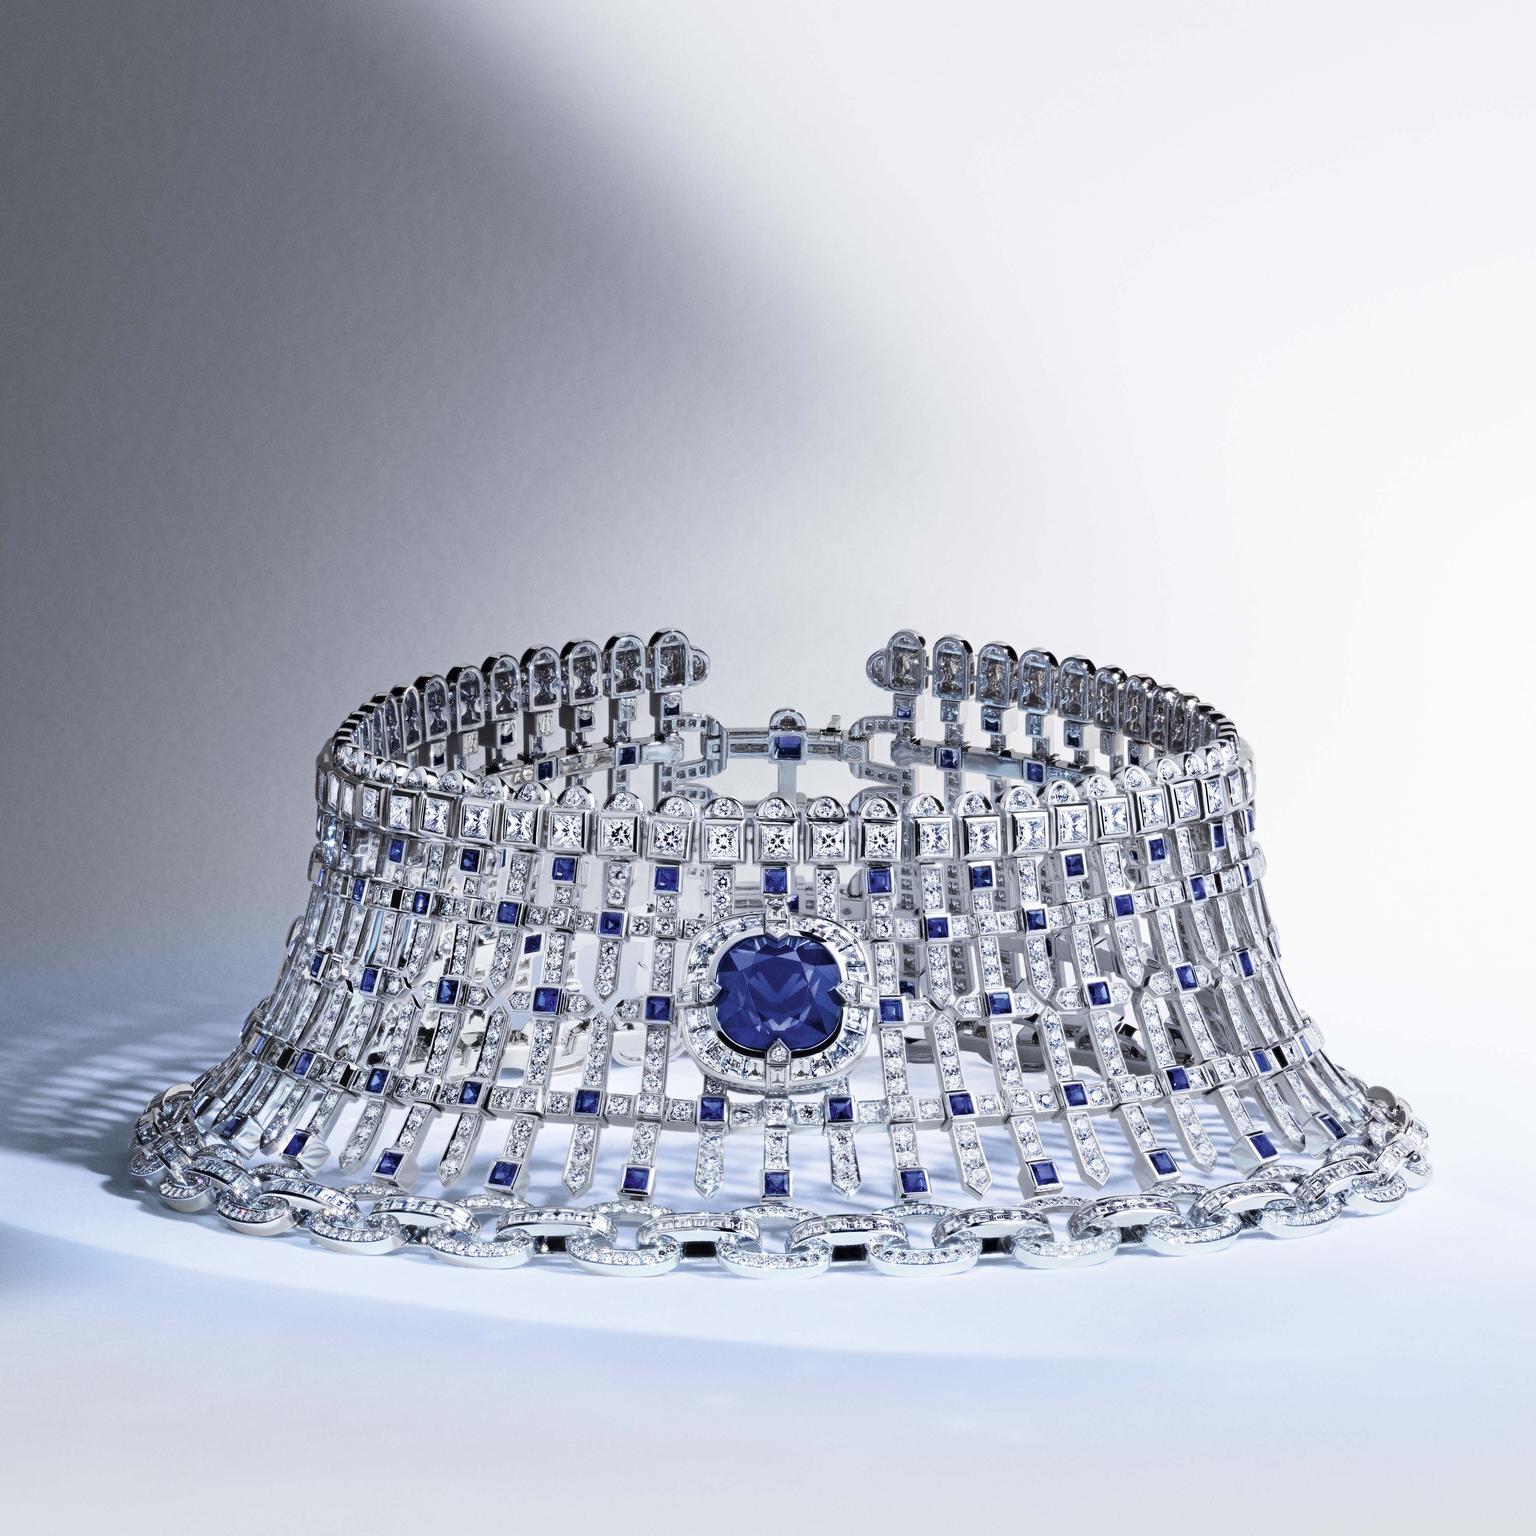 Louis Vuitton Riders of the Knights Le Royaume diamond and sapphire choker